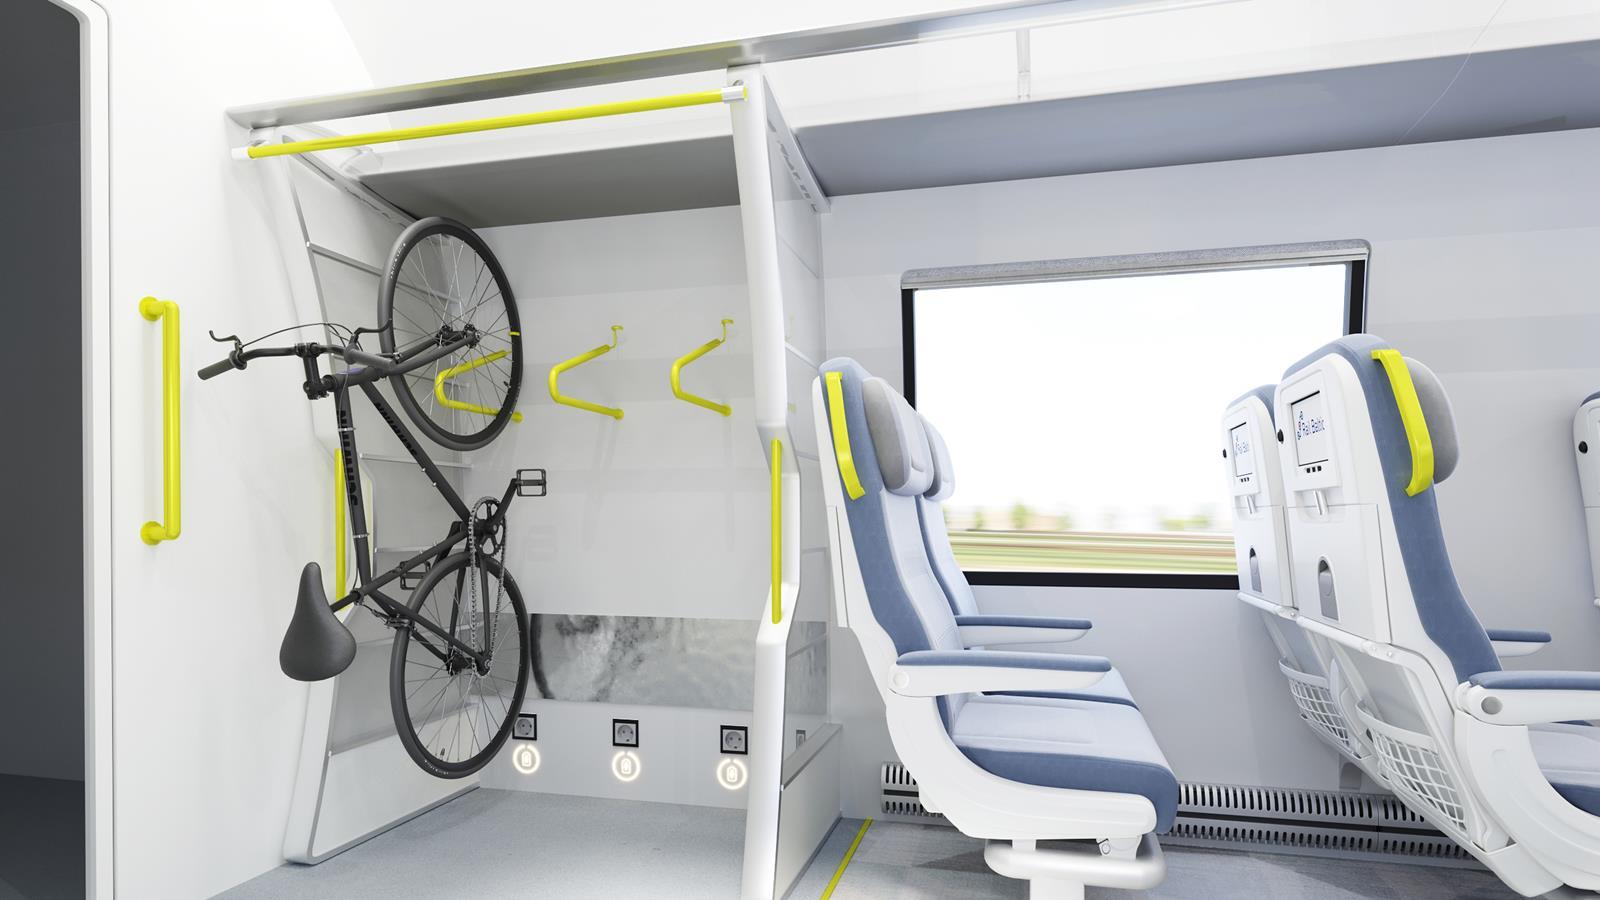 There would be space for pets, bicycles and luggage, with the option for passengers connecting with flights to check-in baggage.